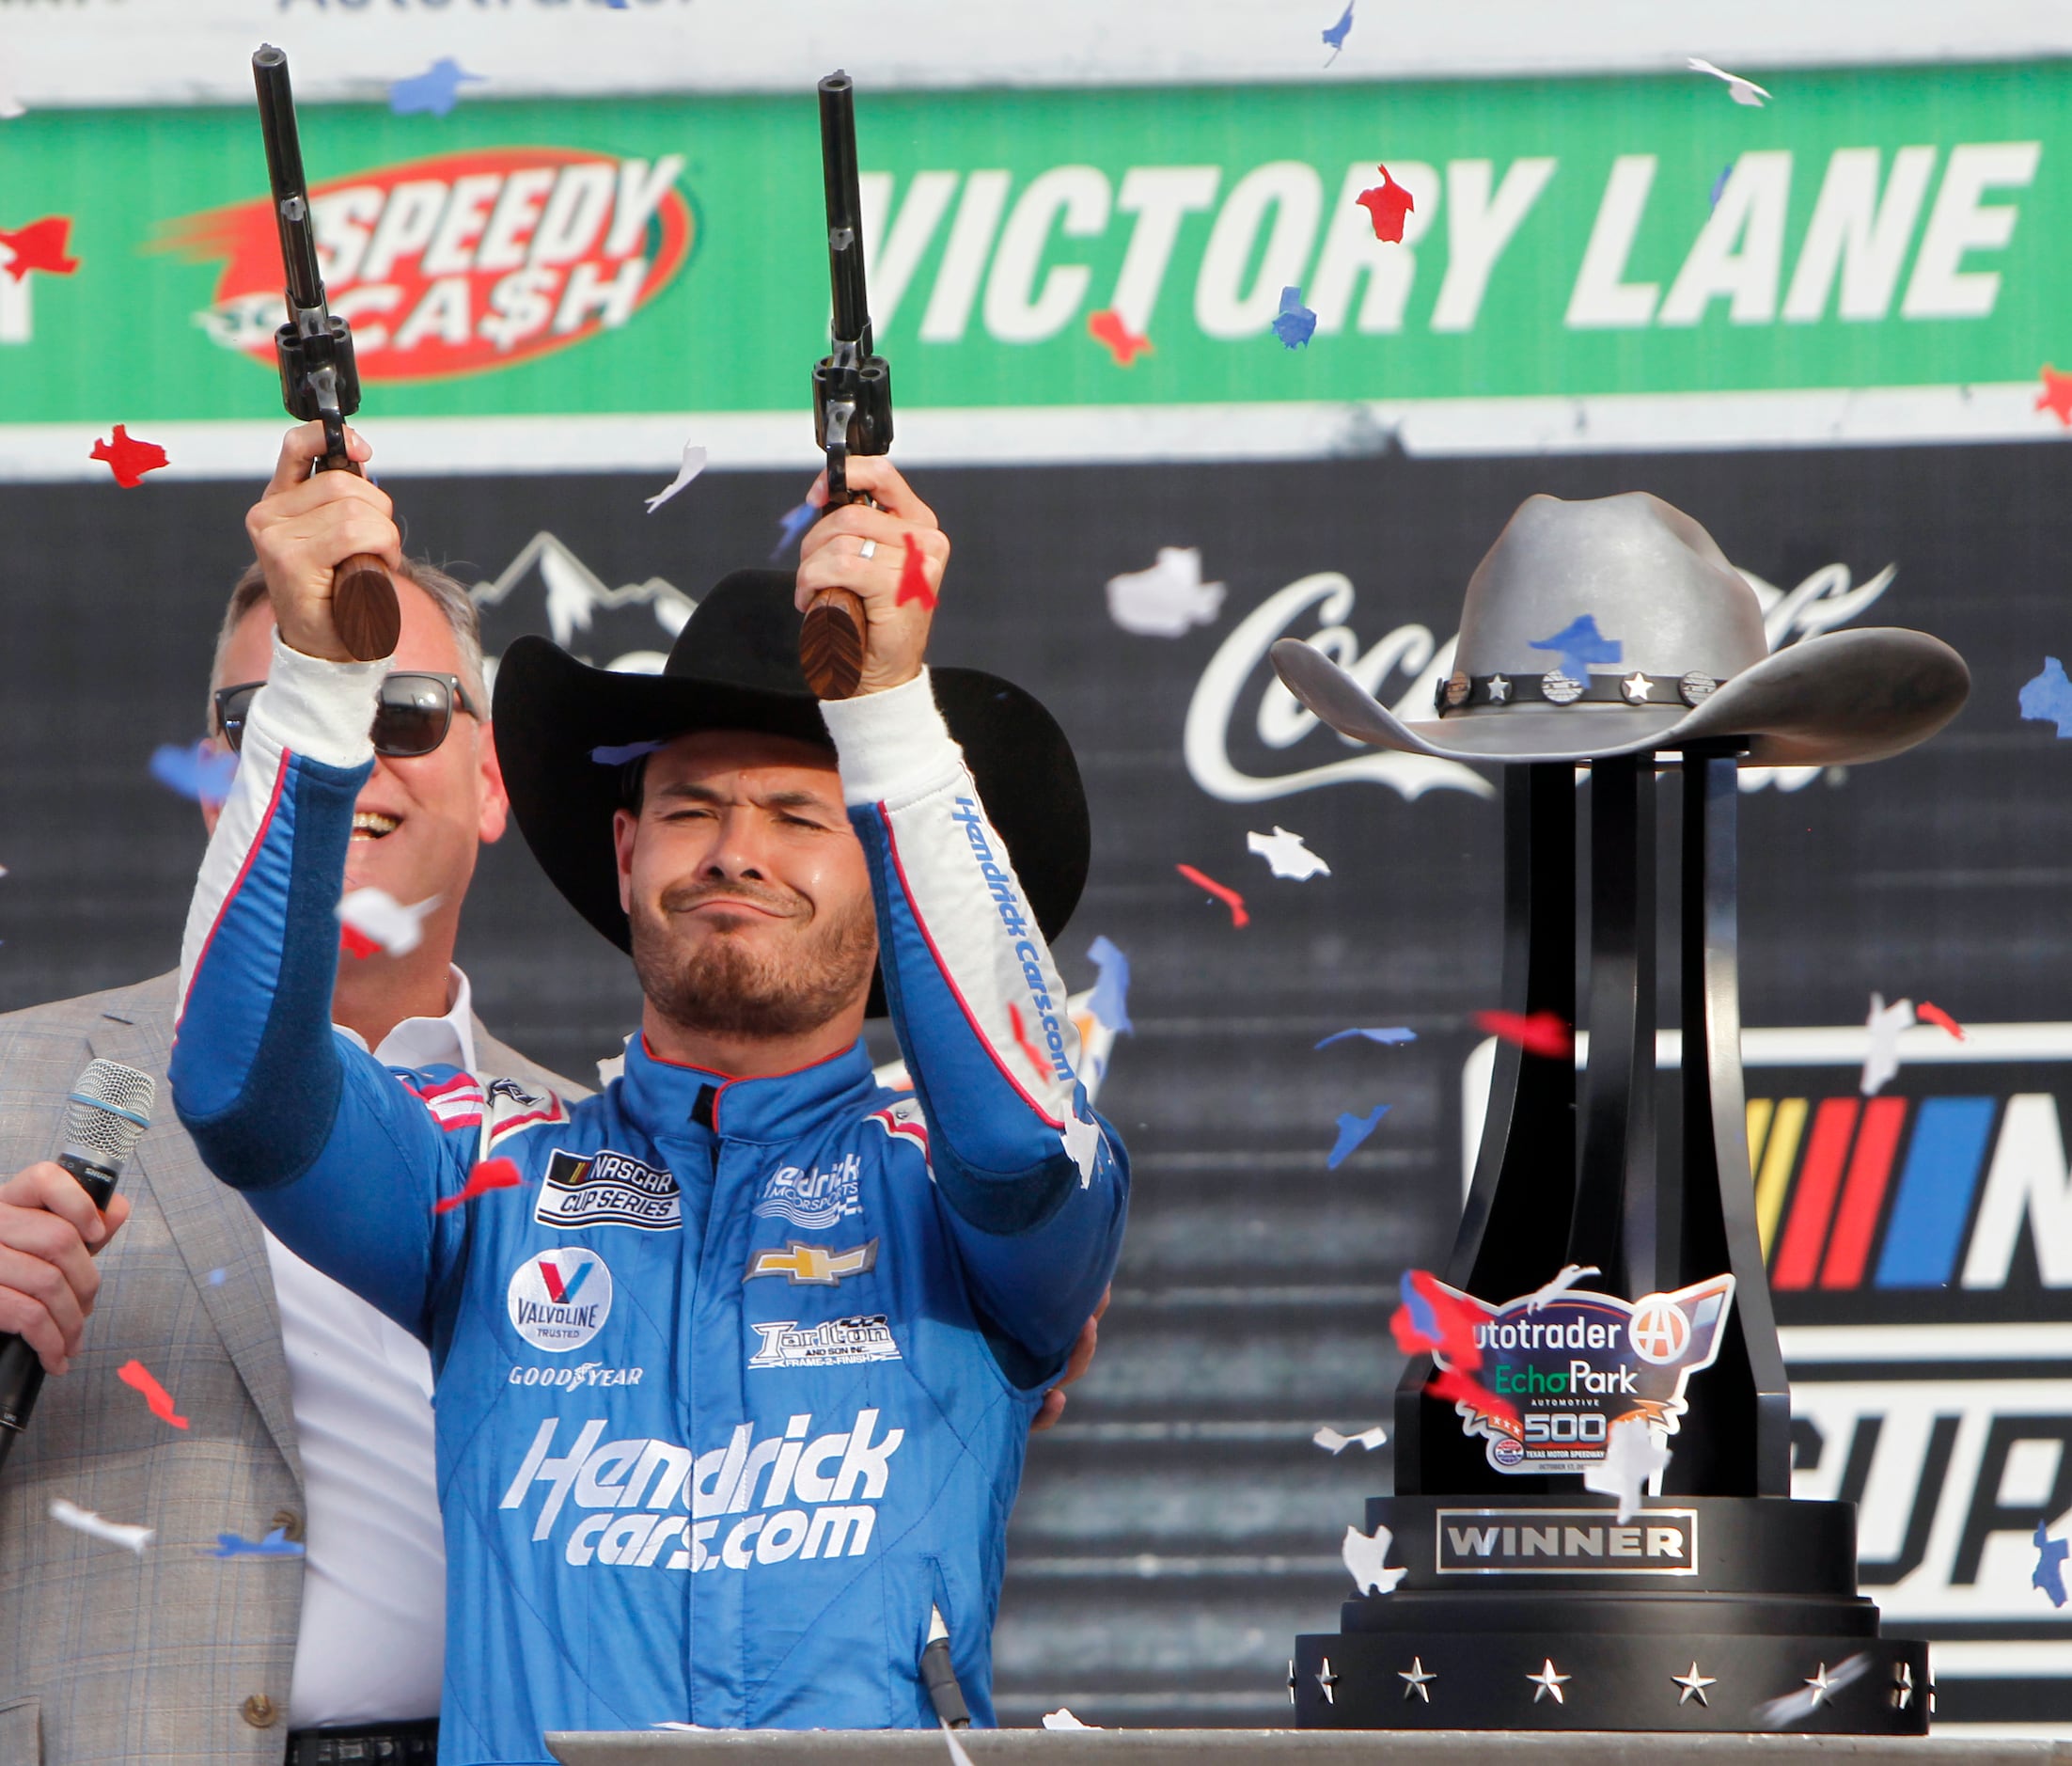 Kyle Larson grimaces as he fires a pair of pistols in celebration of his victory from behind...